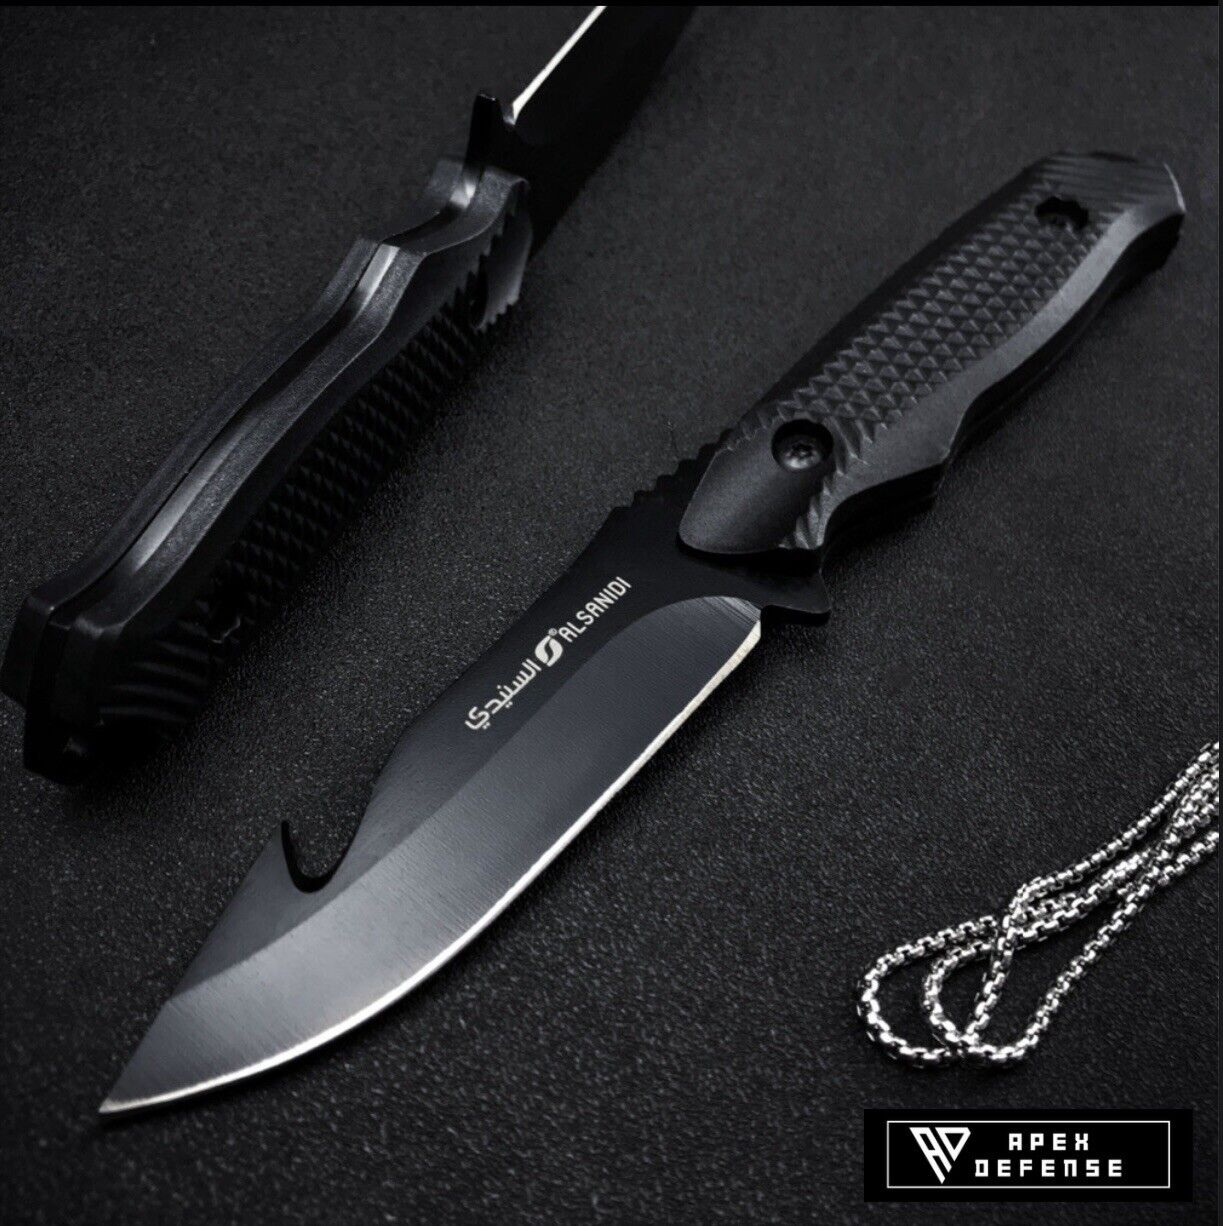 Apex Defense: Night Wing Fixed Blade Knife & Sheath, EDC Survival Tactical Knife